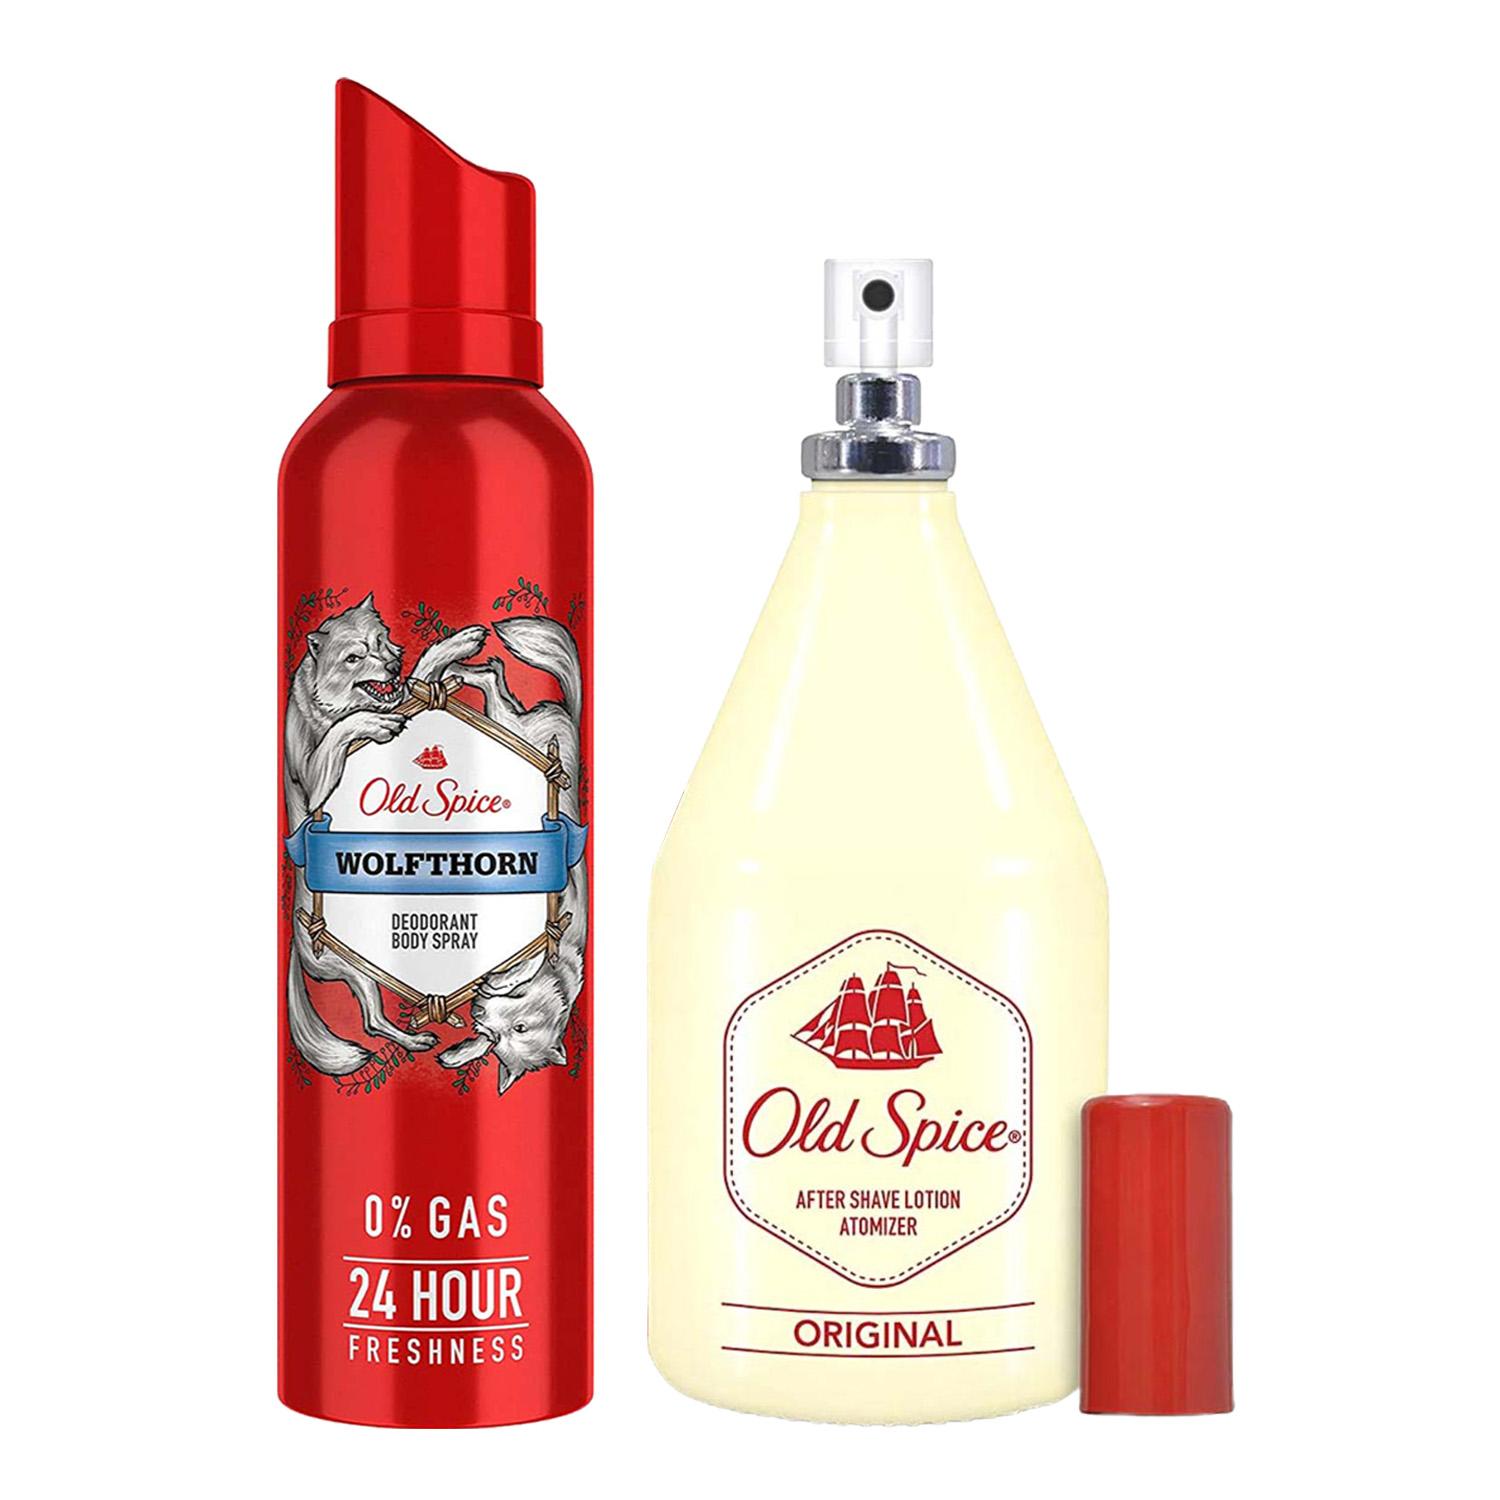 Old Spice | Old Spice After Shave Lotion Smell Like A Man & No Gas Deo Body Spray Perfume For Men Combo